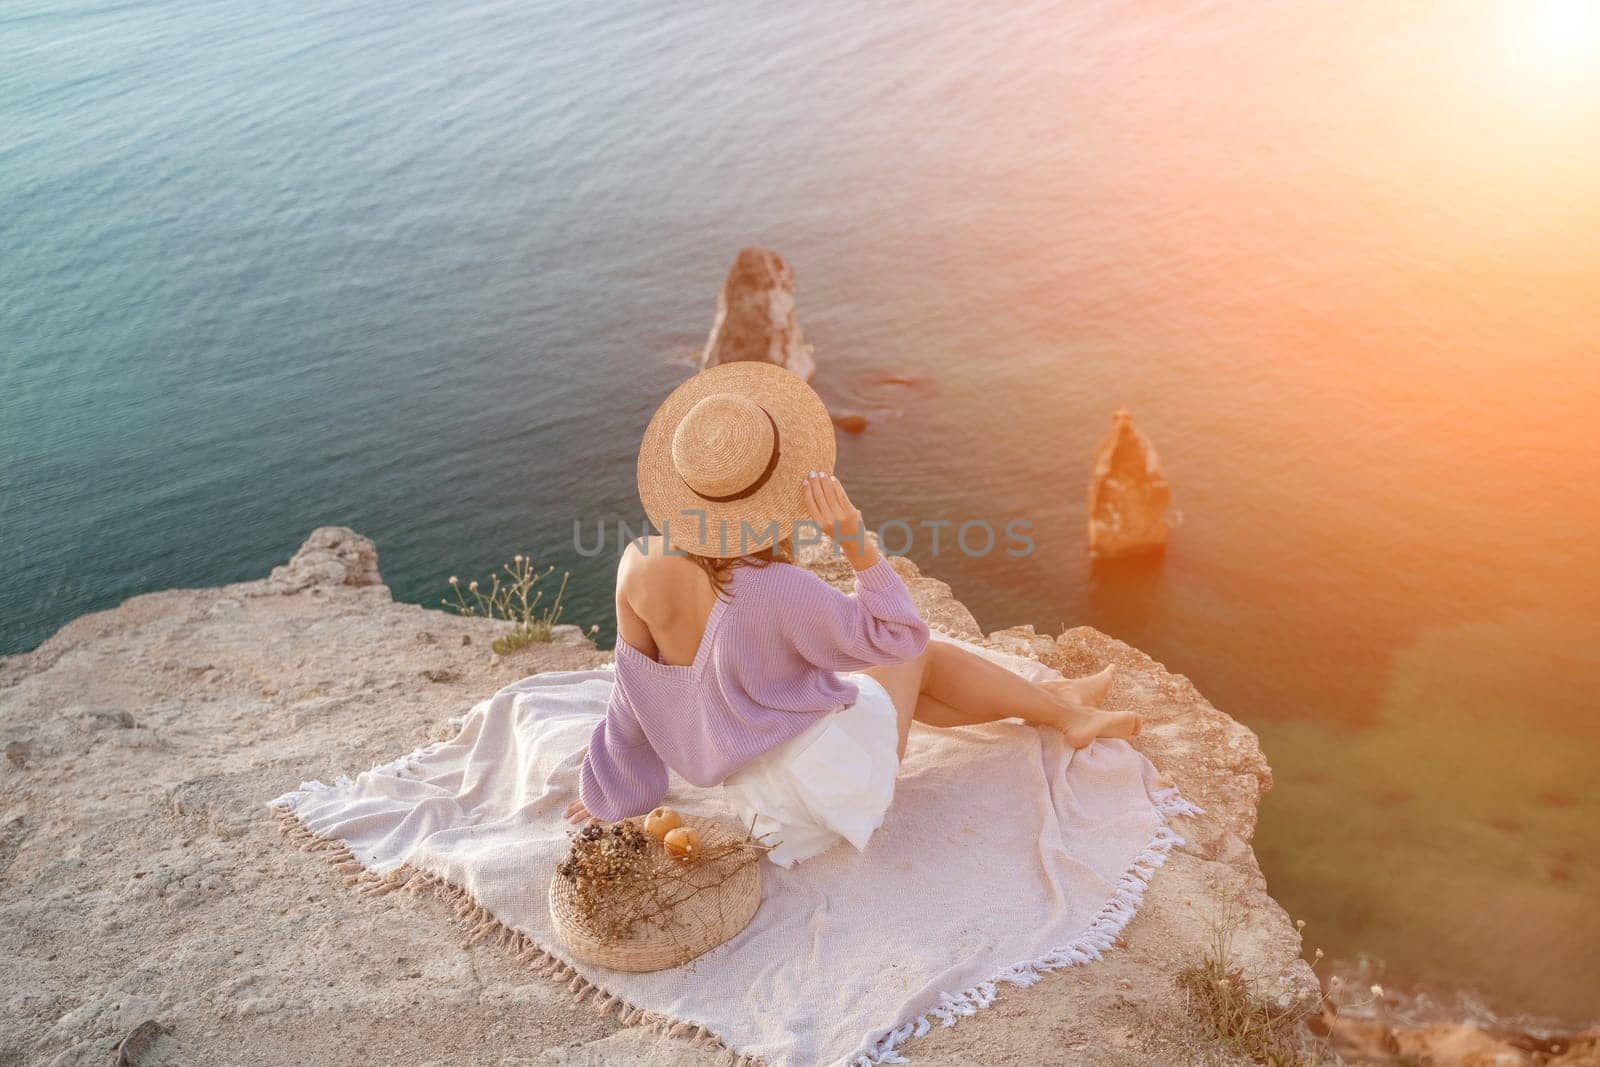 woman sea travel. photo of a beautiful woman with long blond hair in a pink shirt and denim shorts and a hat having a picnic on a hill overlooking the sea.